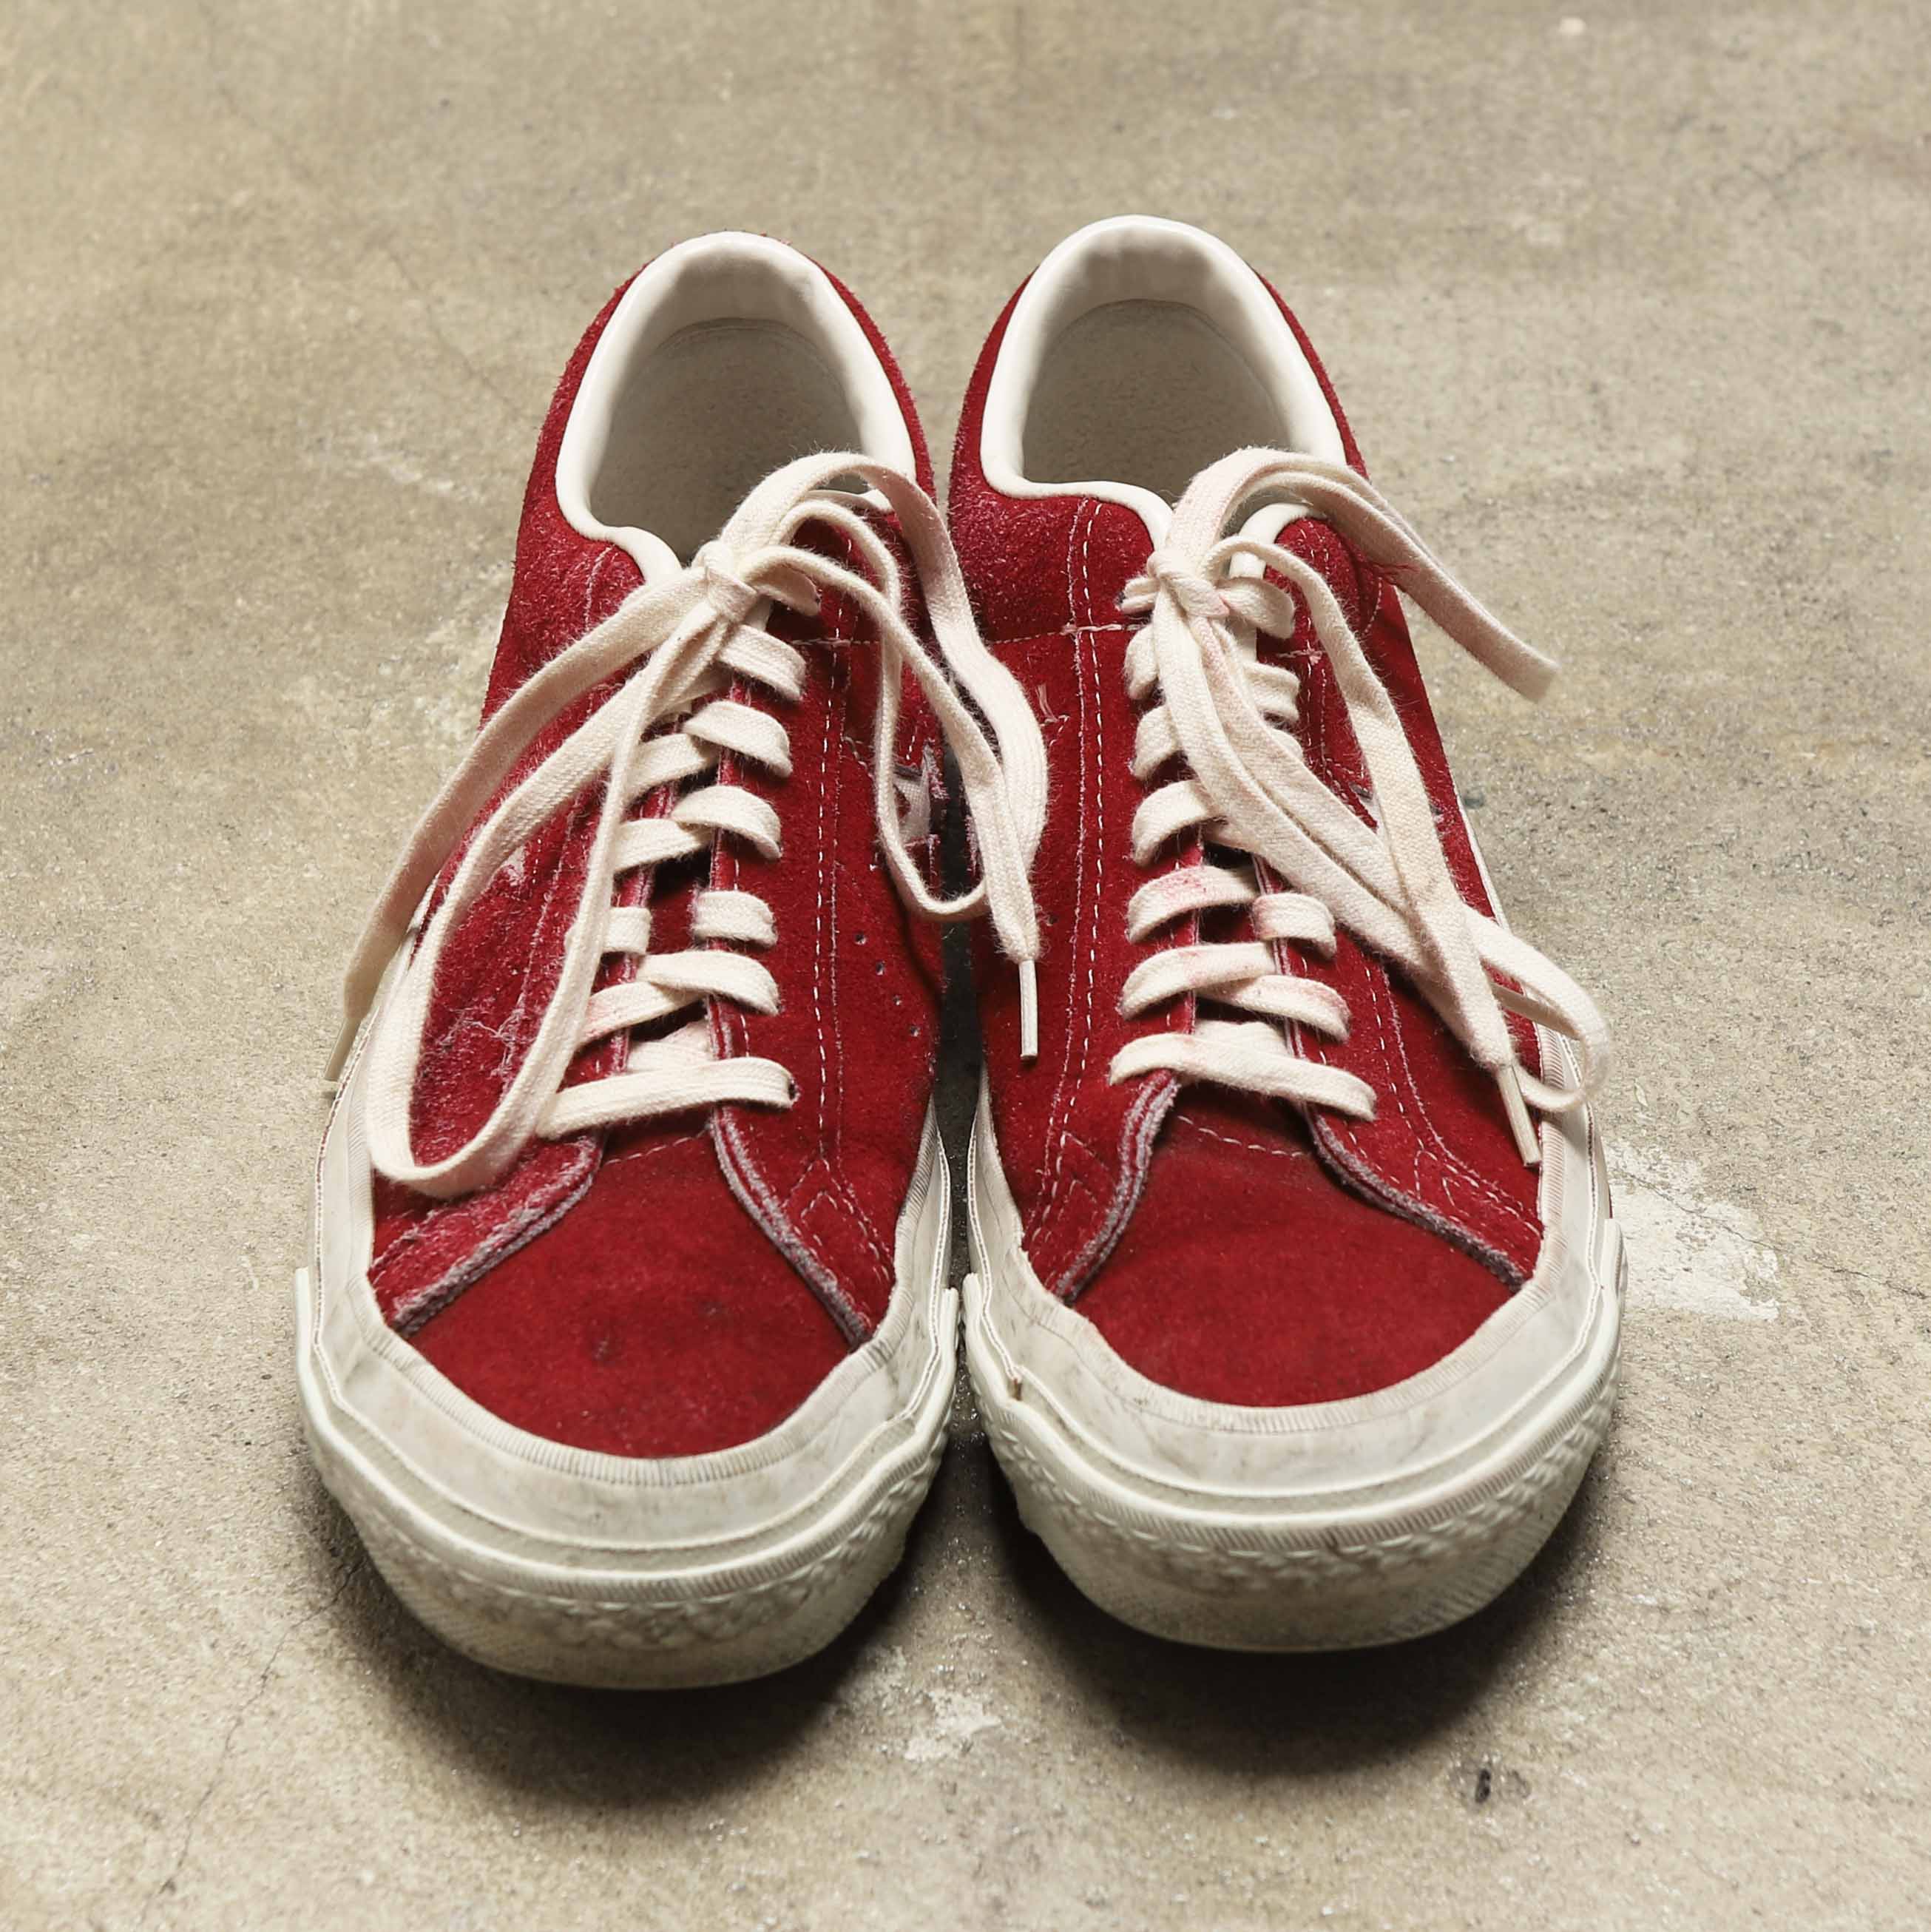 CONVERSE JAPAN ONE STAR SUEDE - RED